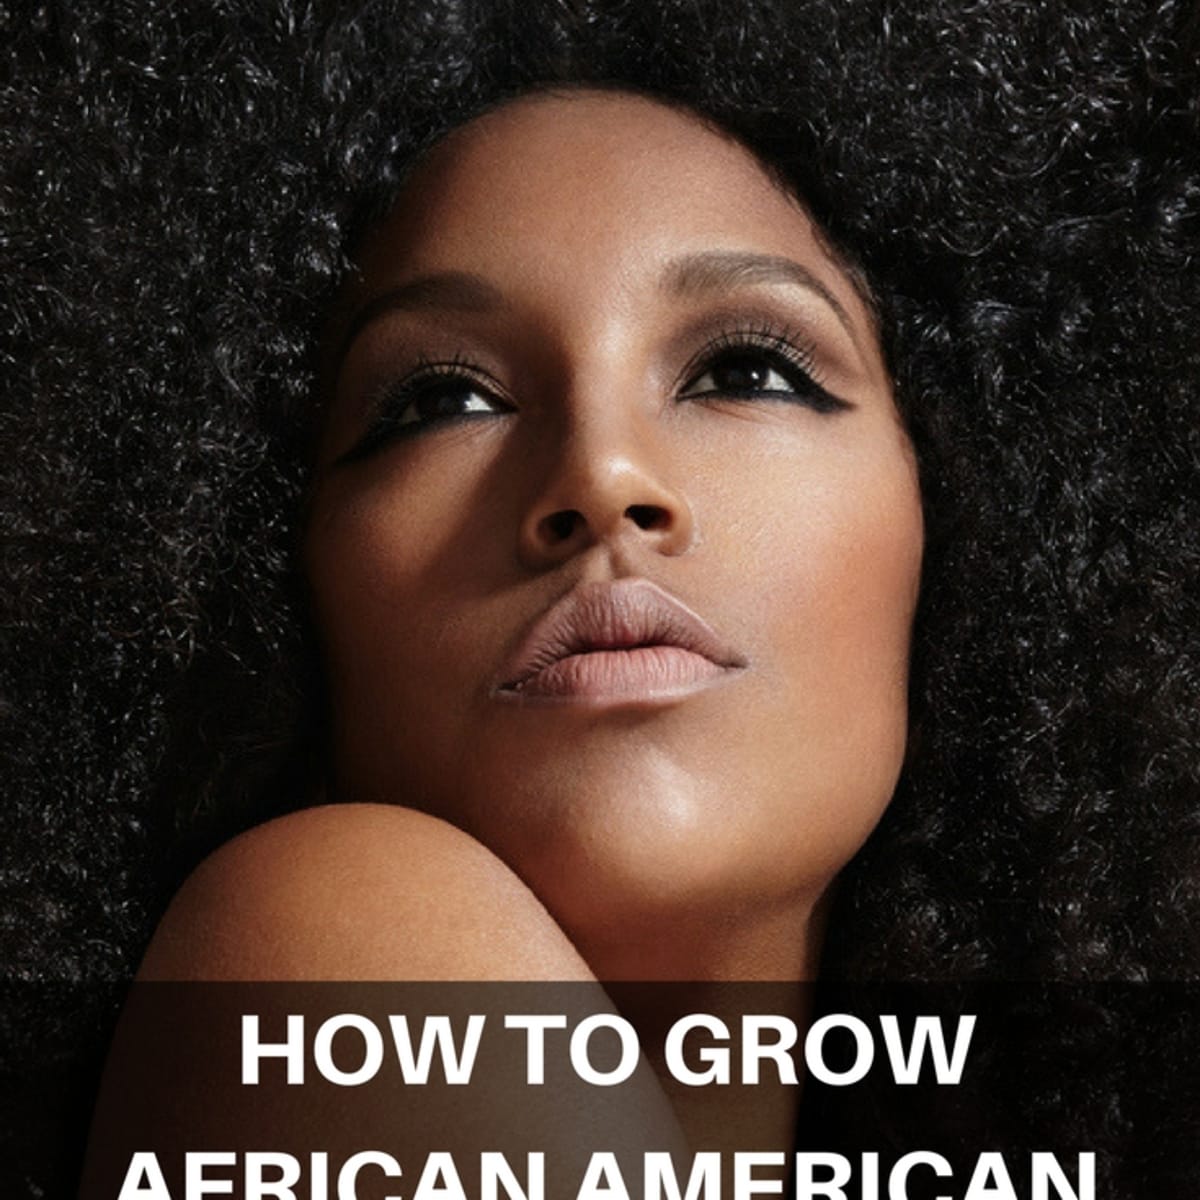 52-hq-photos-what-grows-black-people-hair-fast-tips-for-growing-longer-healthier-black-natural